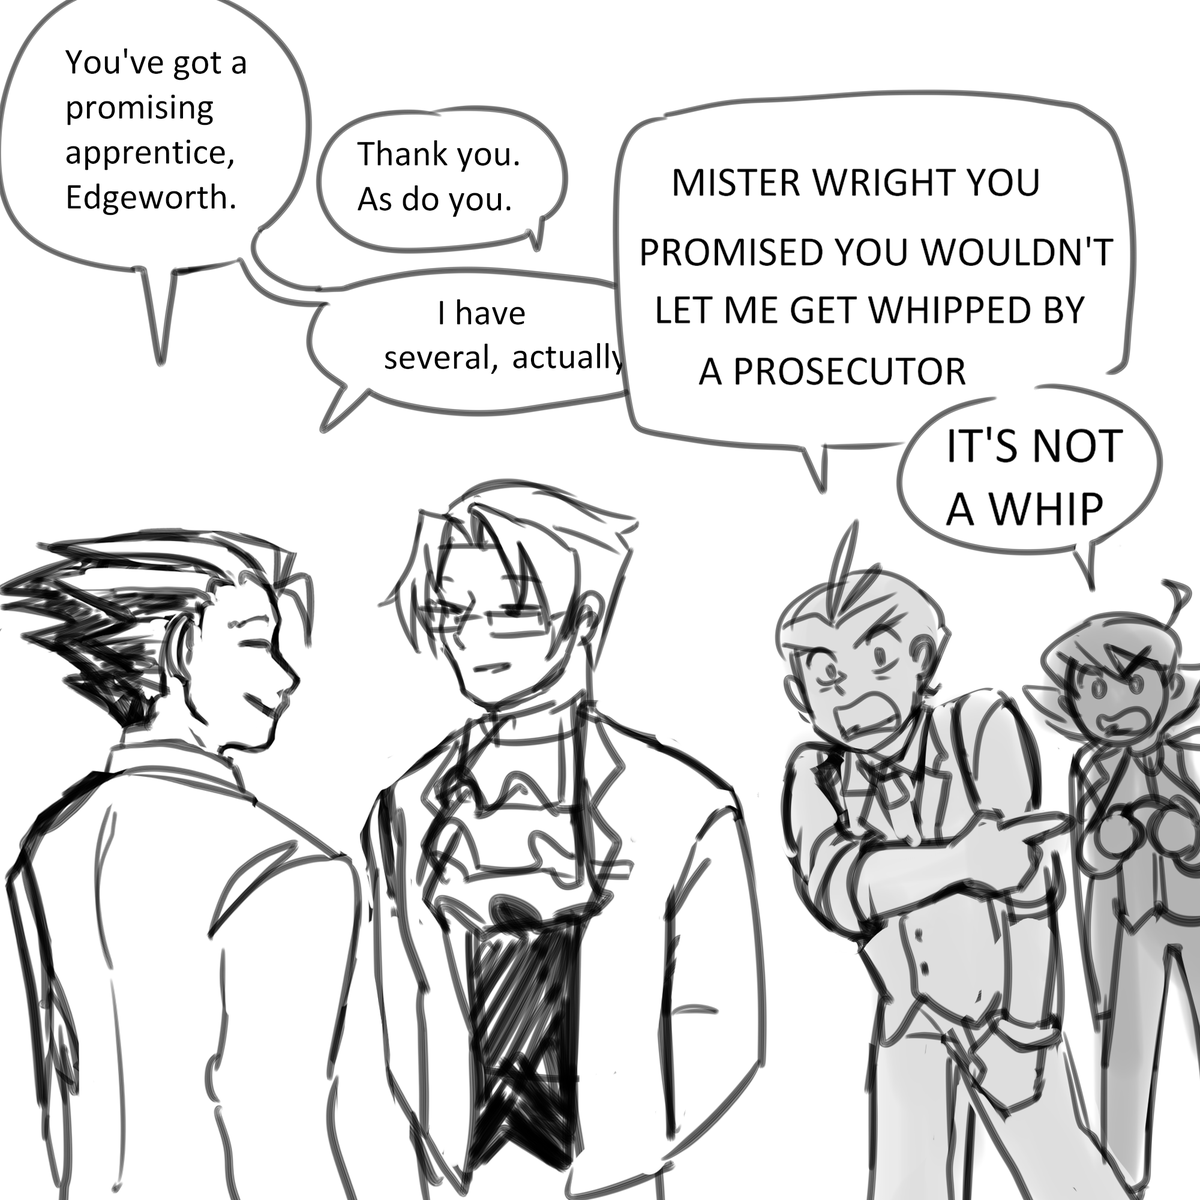 edgeworth taking seb under his wing,,,,,,,,,,,,    apprentices and mentors facing off......................     look i can dream............................

#aceattorney 